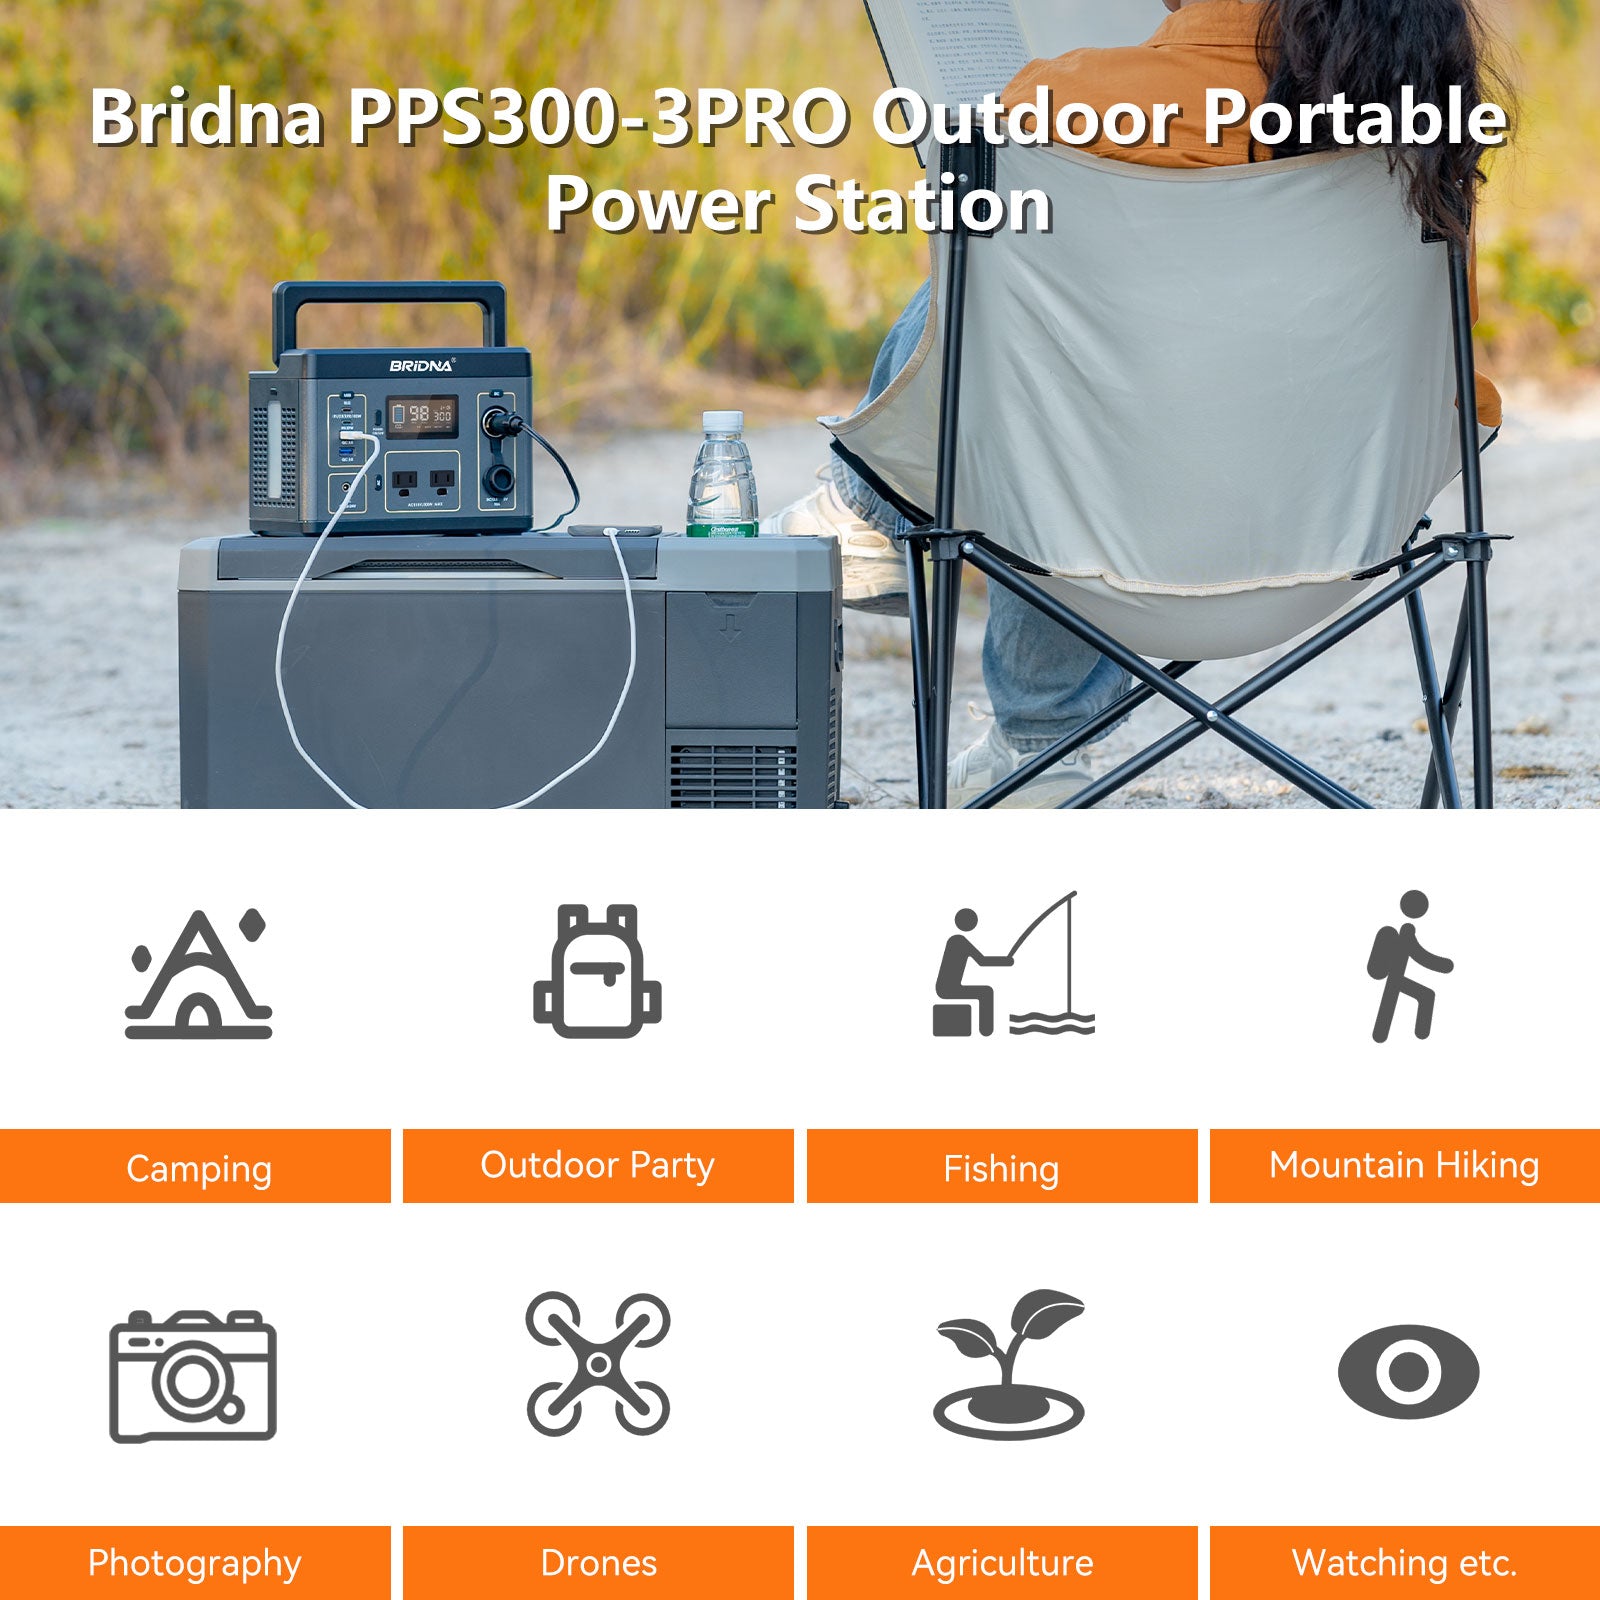 BRIDNA PPS300-3 Pro Portable Power Station for Outdoor Travel Camping